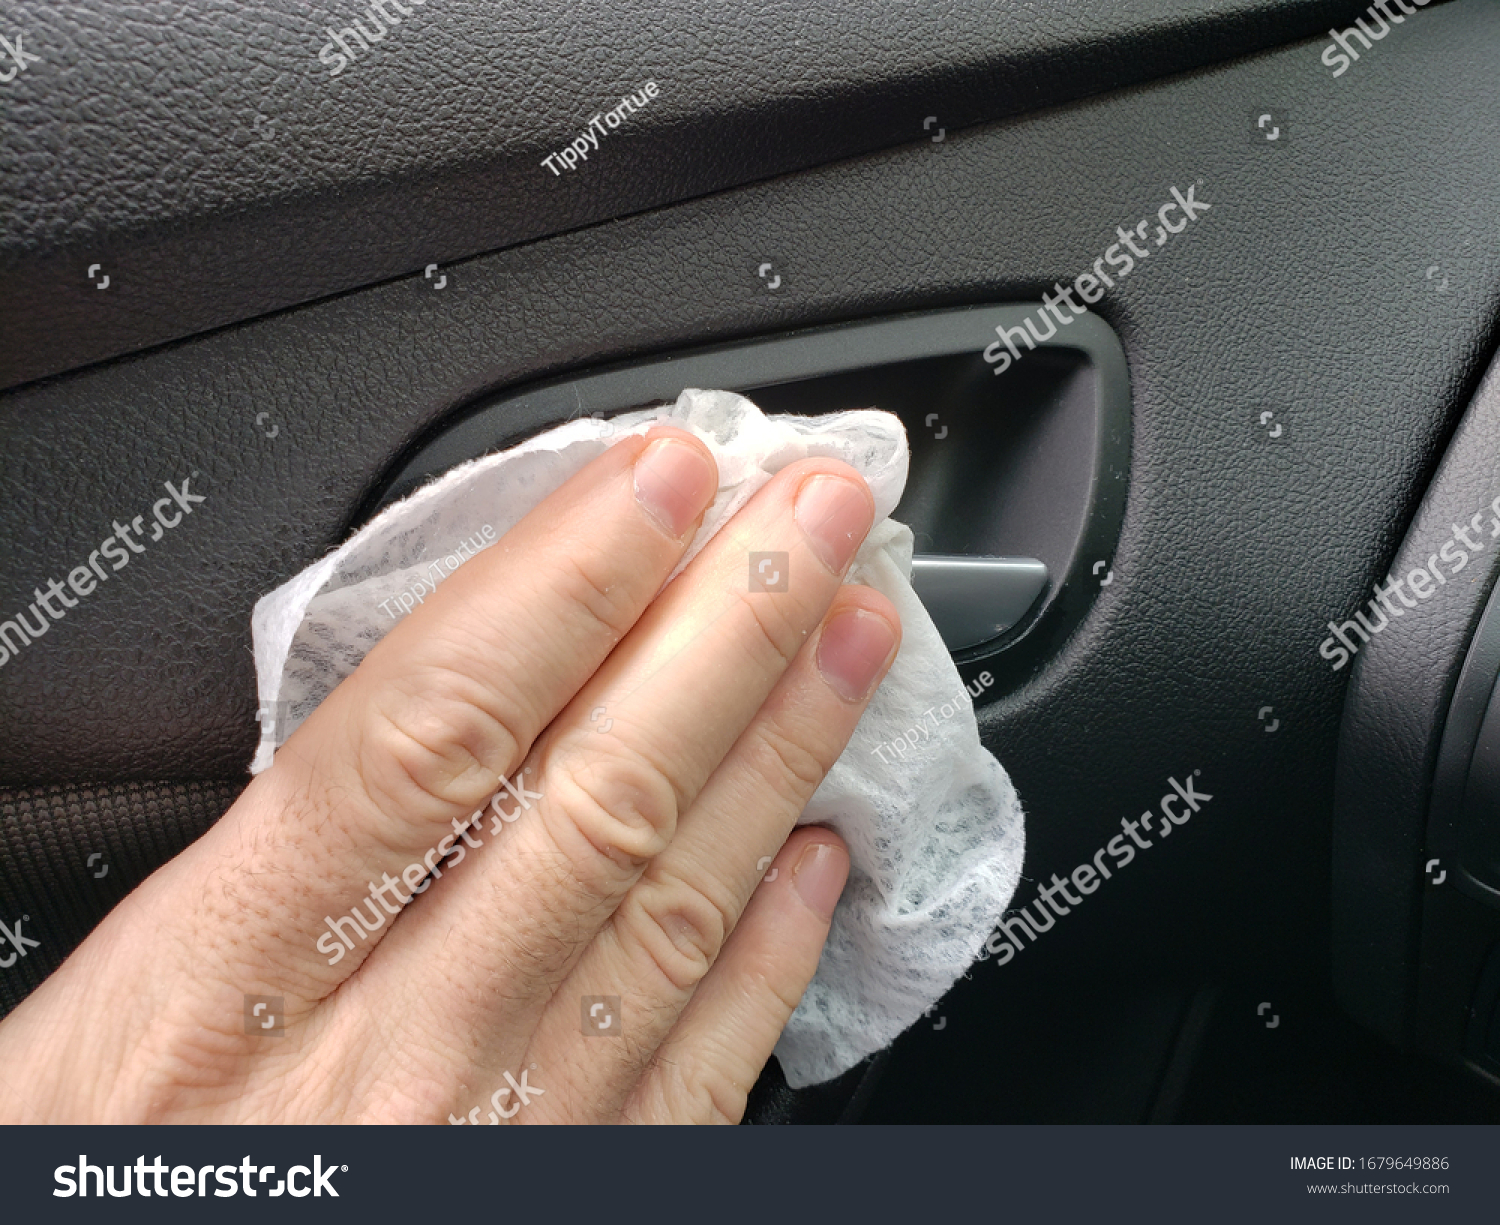 A man is using 99.9 disinfectant wipes to clean the interior parts of his vehicle during the coronavirus outbreak pandemic.